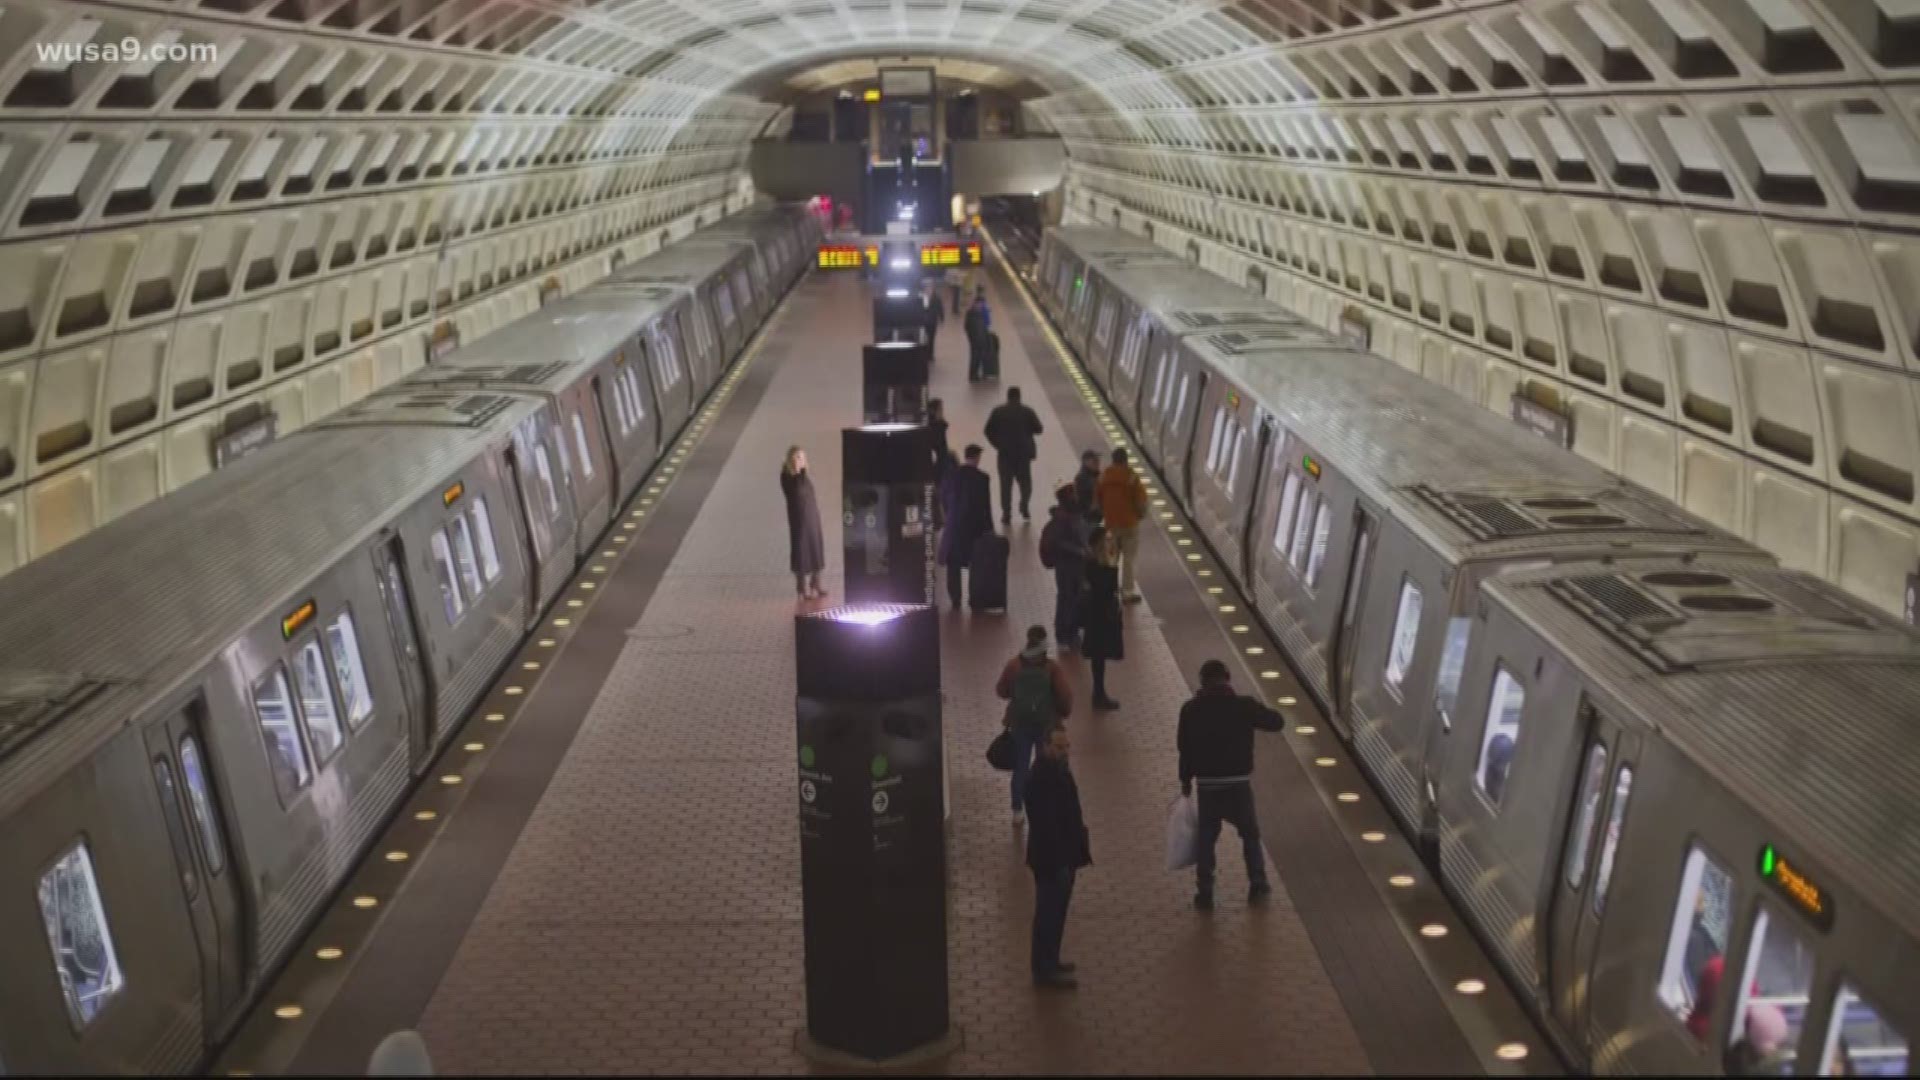 Metro officials are encouraging customers who think they are ill to find an alternate mode of transportation instead of using public transportation.